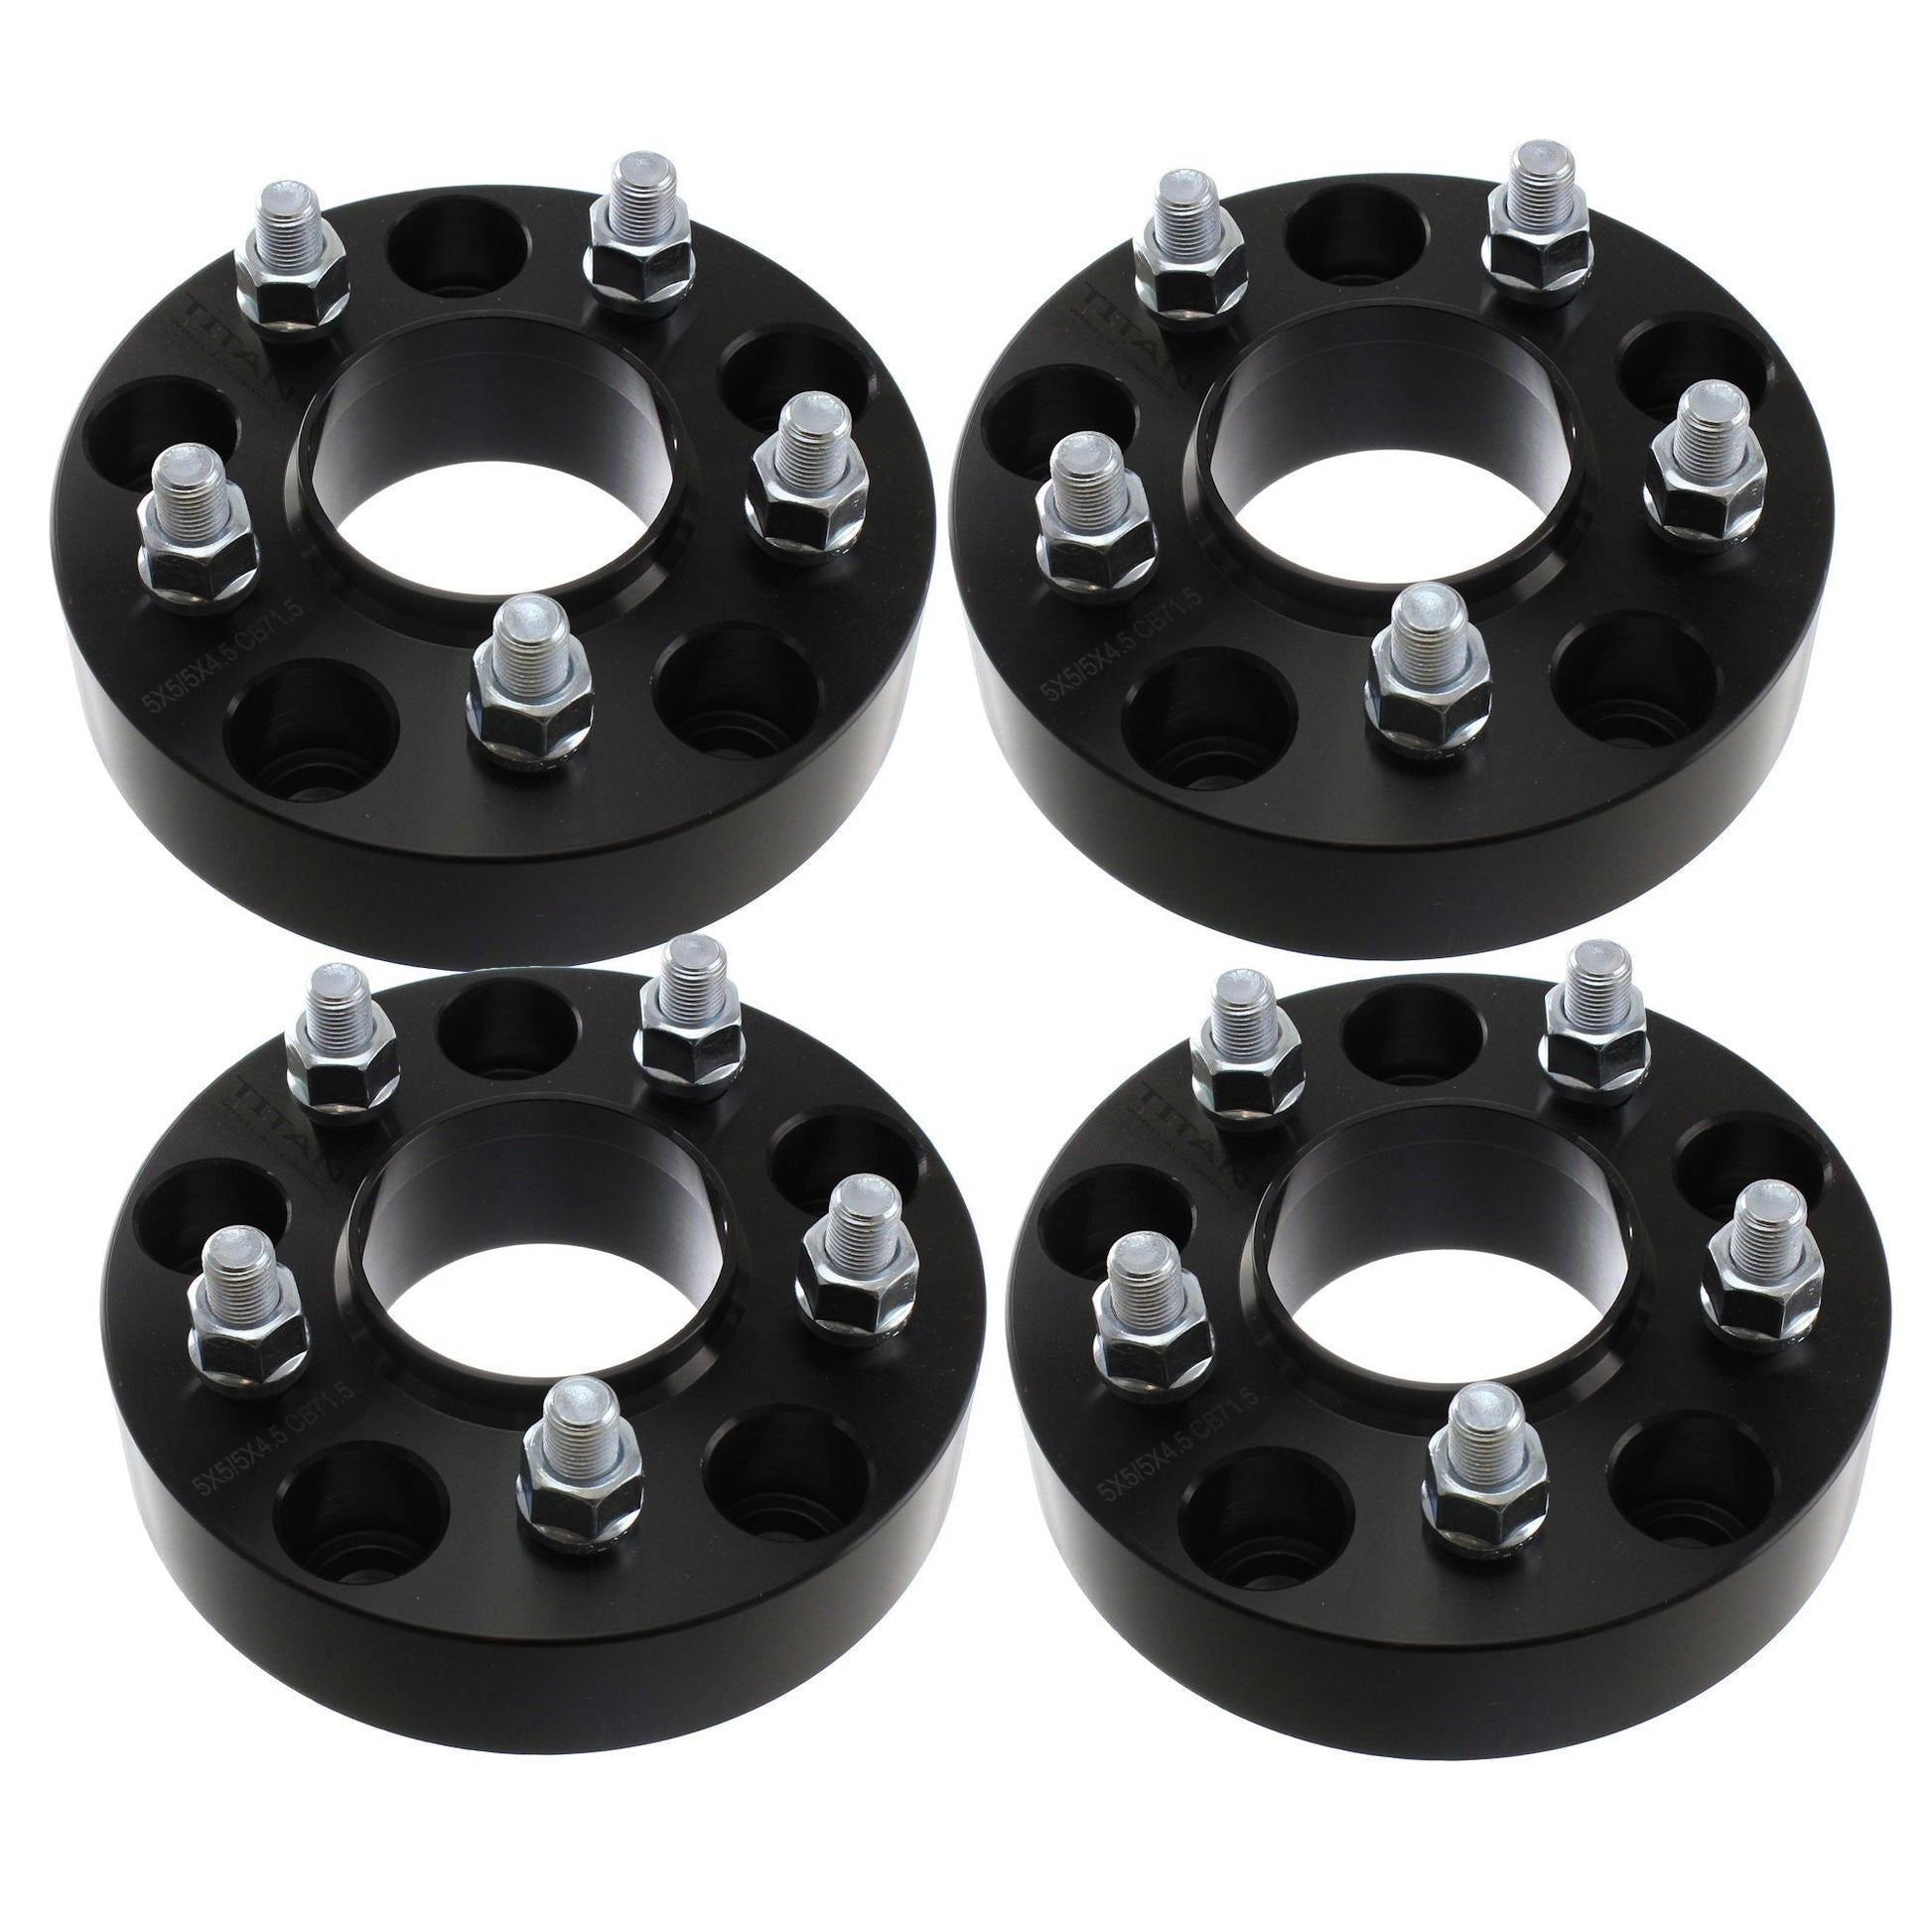 4 Wheel Spacers Adapters 5x5 To 5x4.5 1.5 - 5x127 To 5x114.3